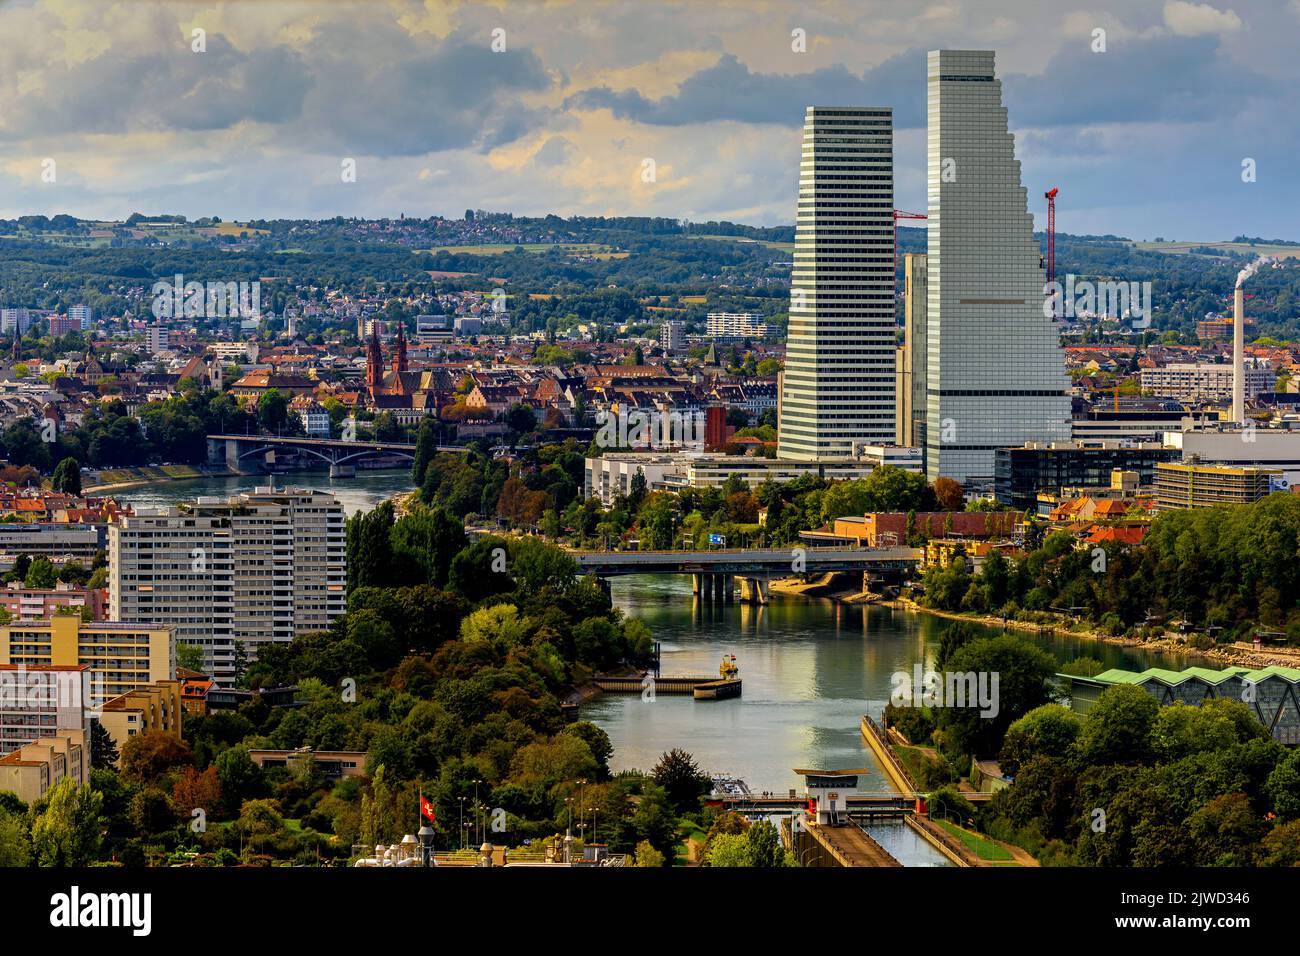 Basel skyline changed dramatically with building the Roche Towers, the highest buildings in Switzerland. Stock Photo